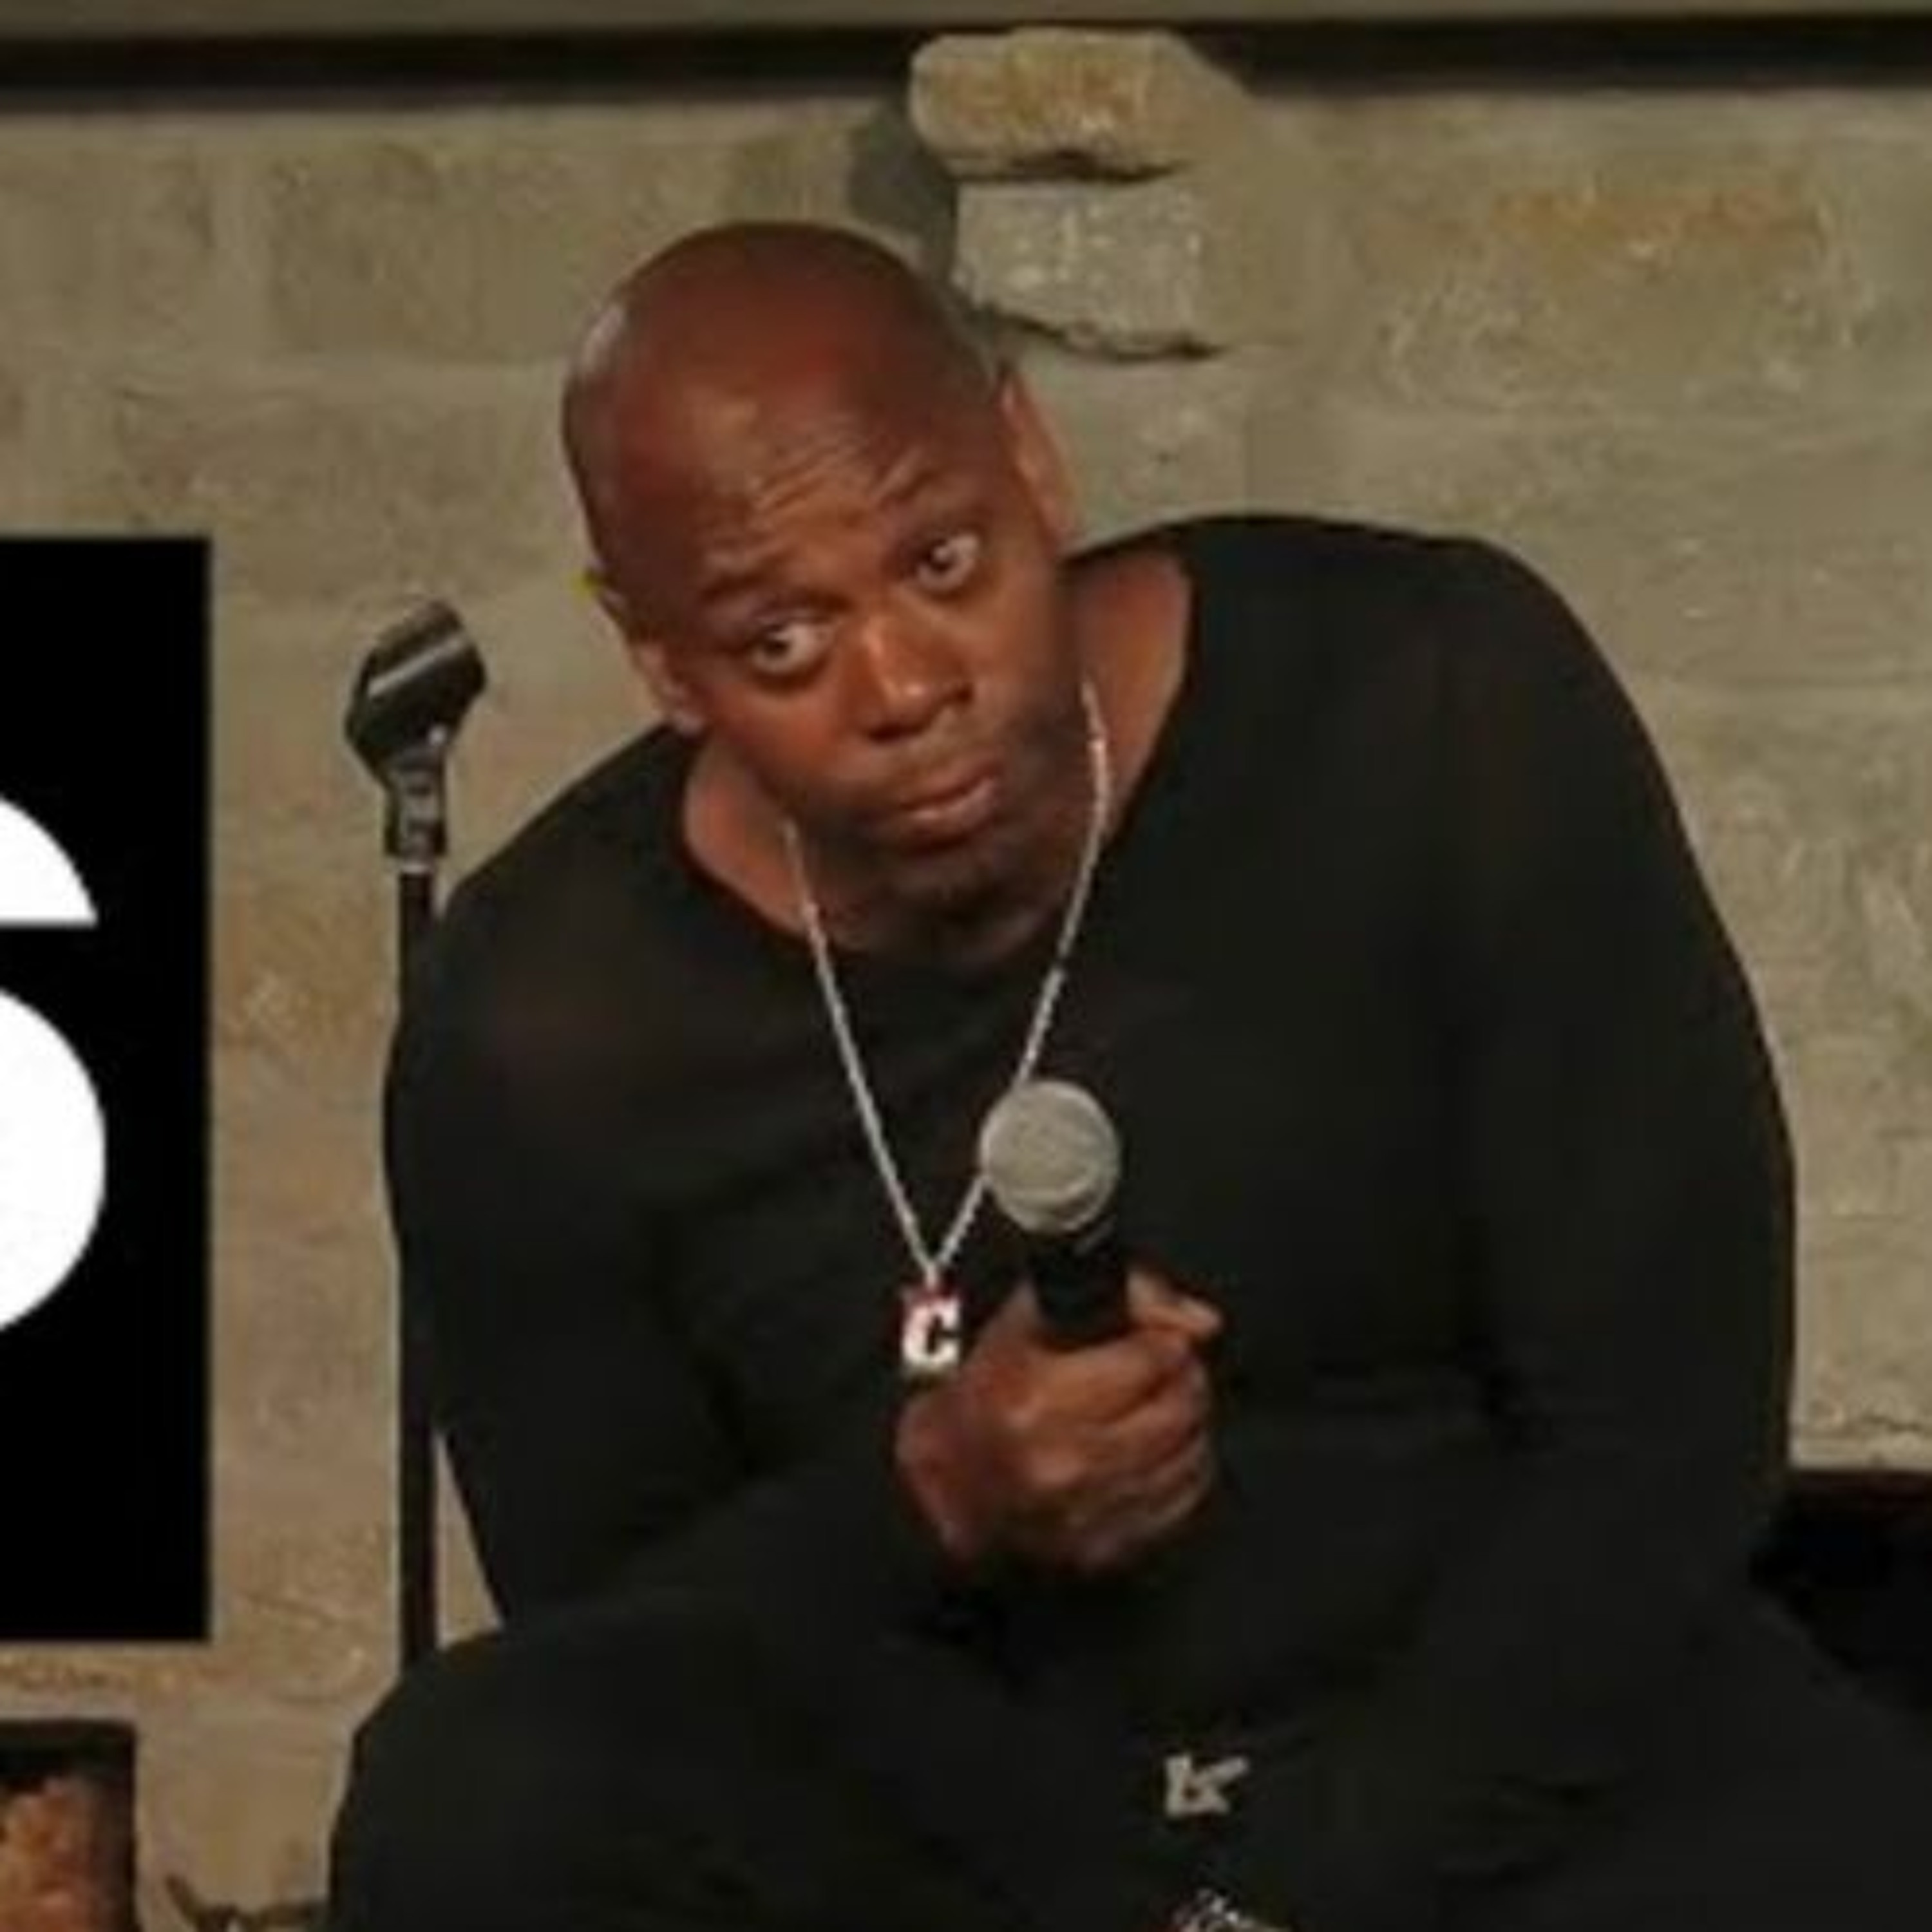 Thumbnail for "LEFTOVERS EP. 8: The Chappelle Special".